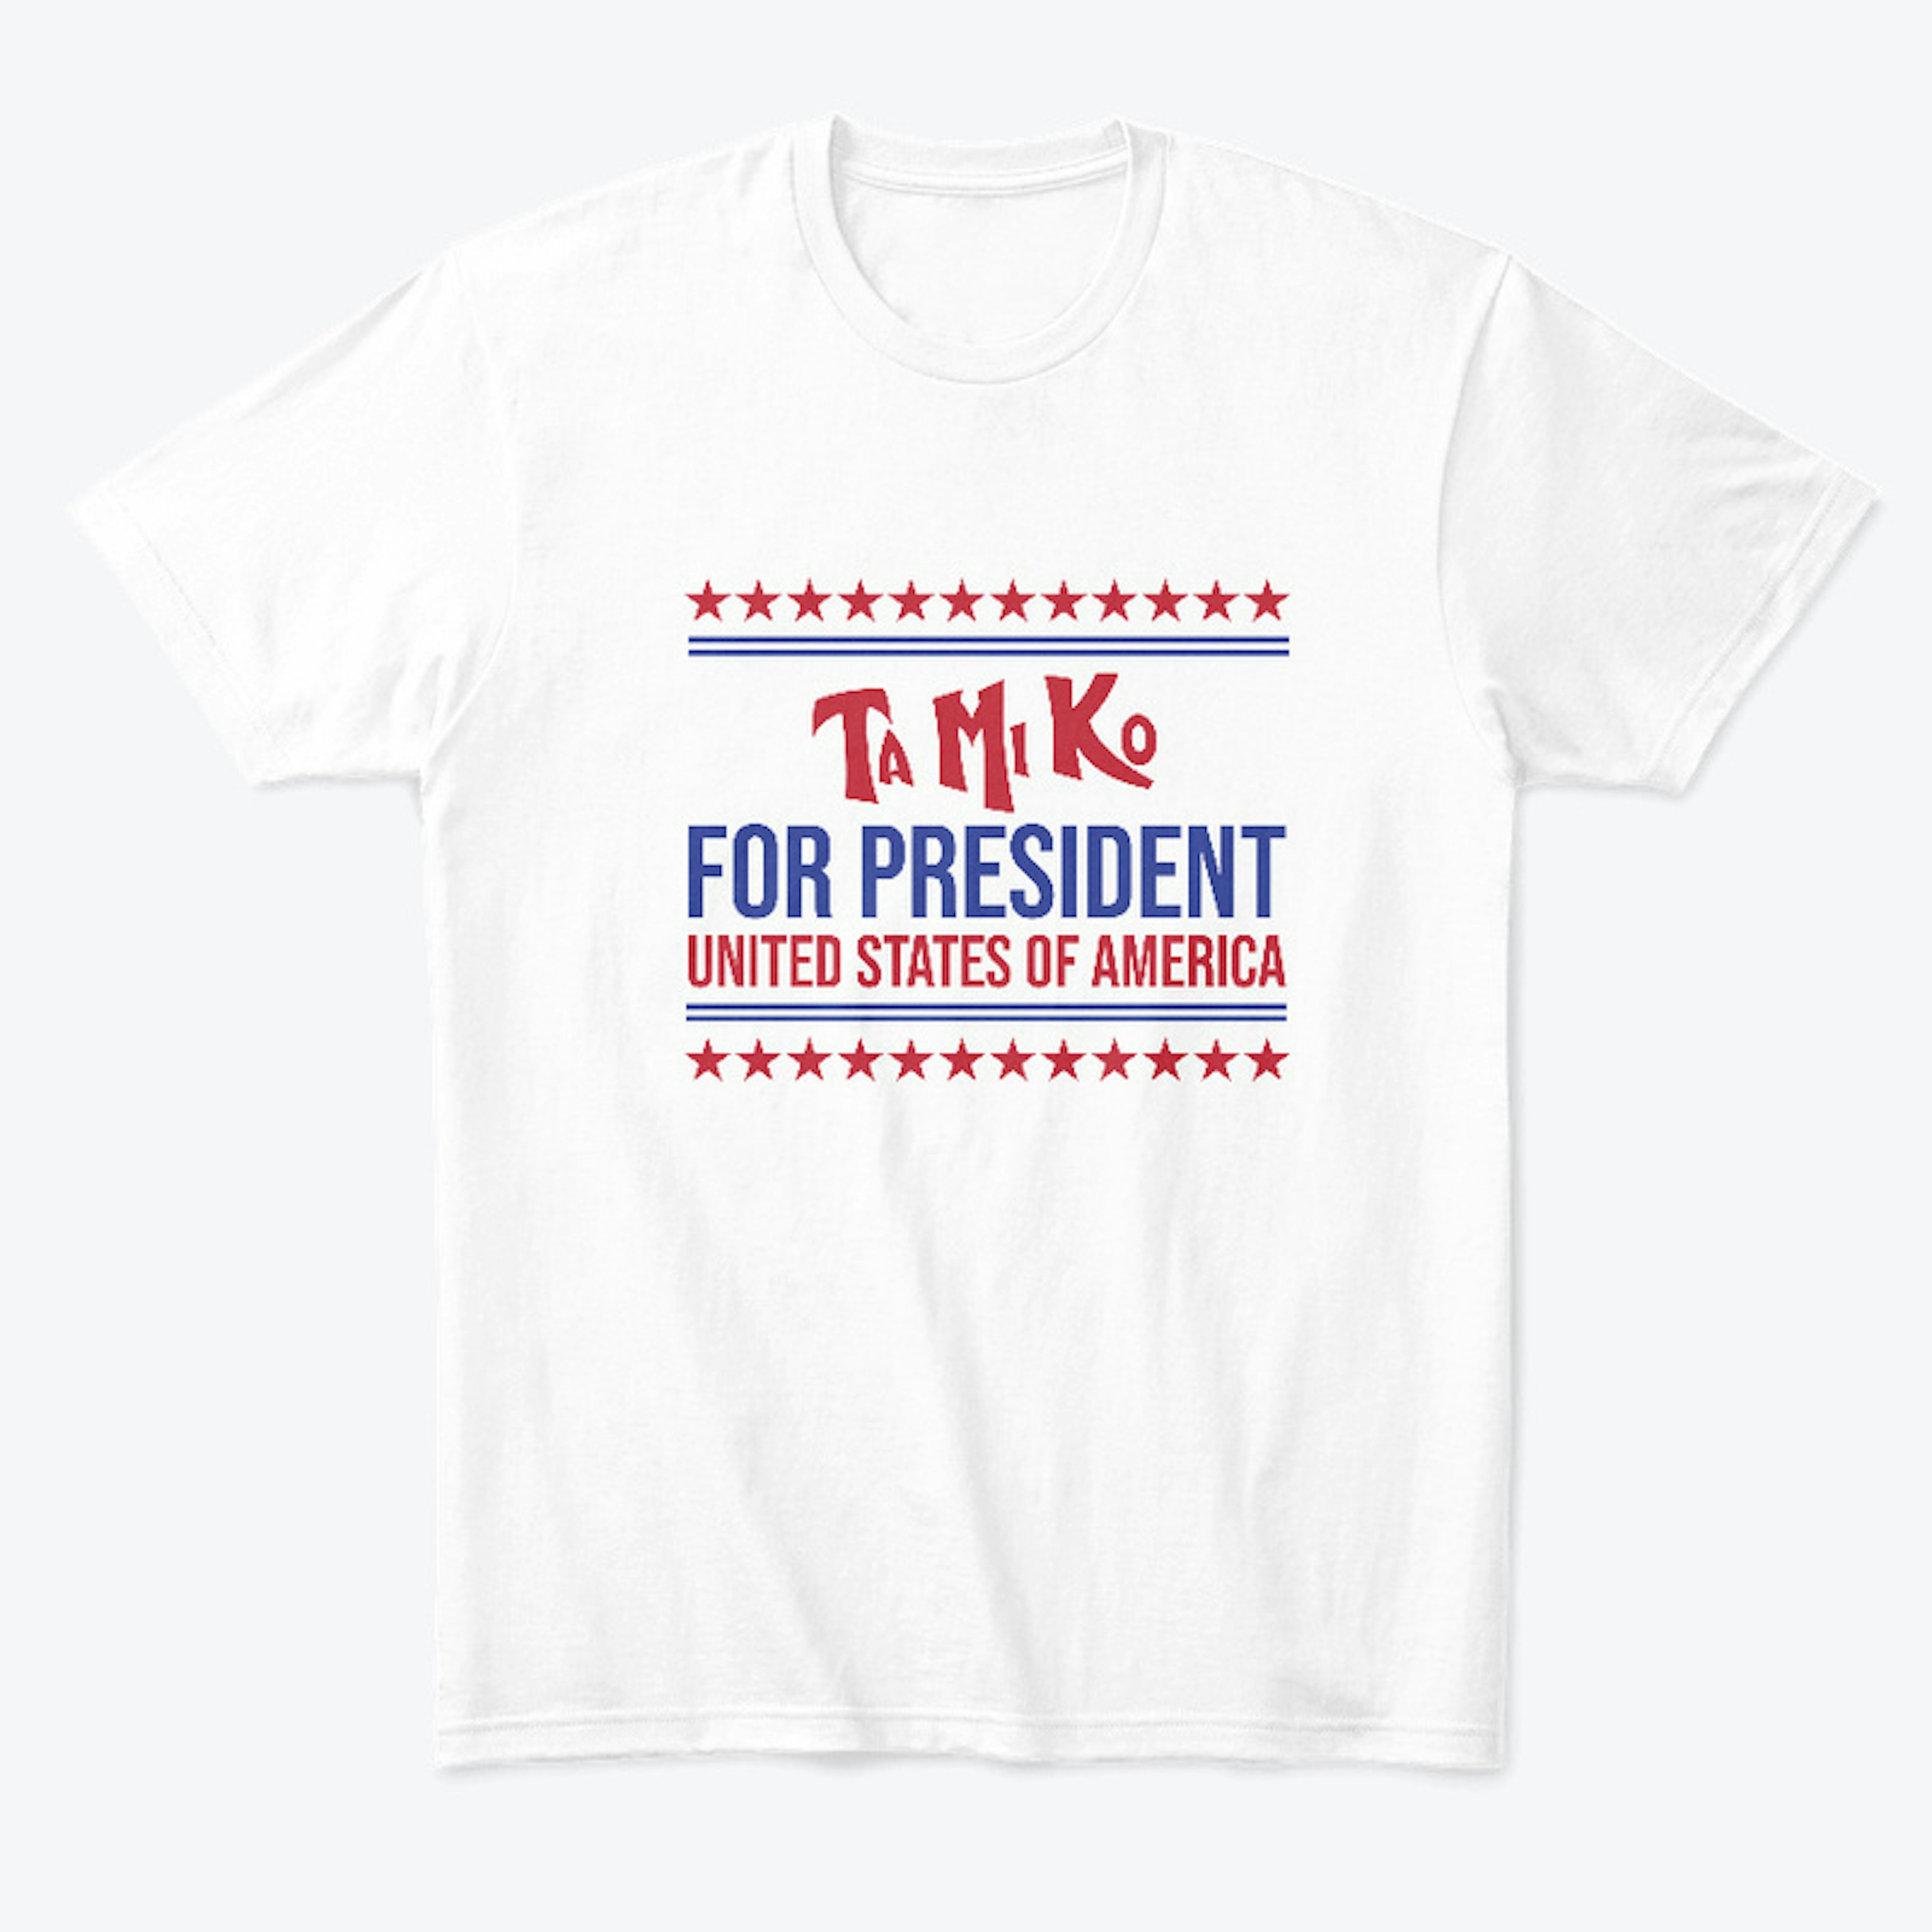 Tamiko for President Campaign